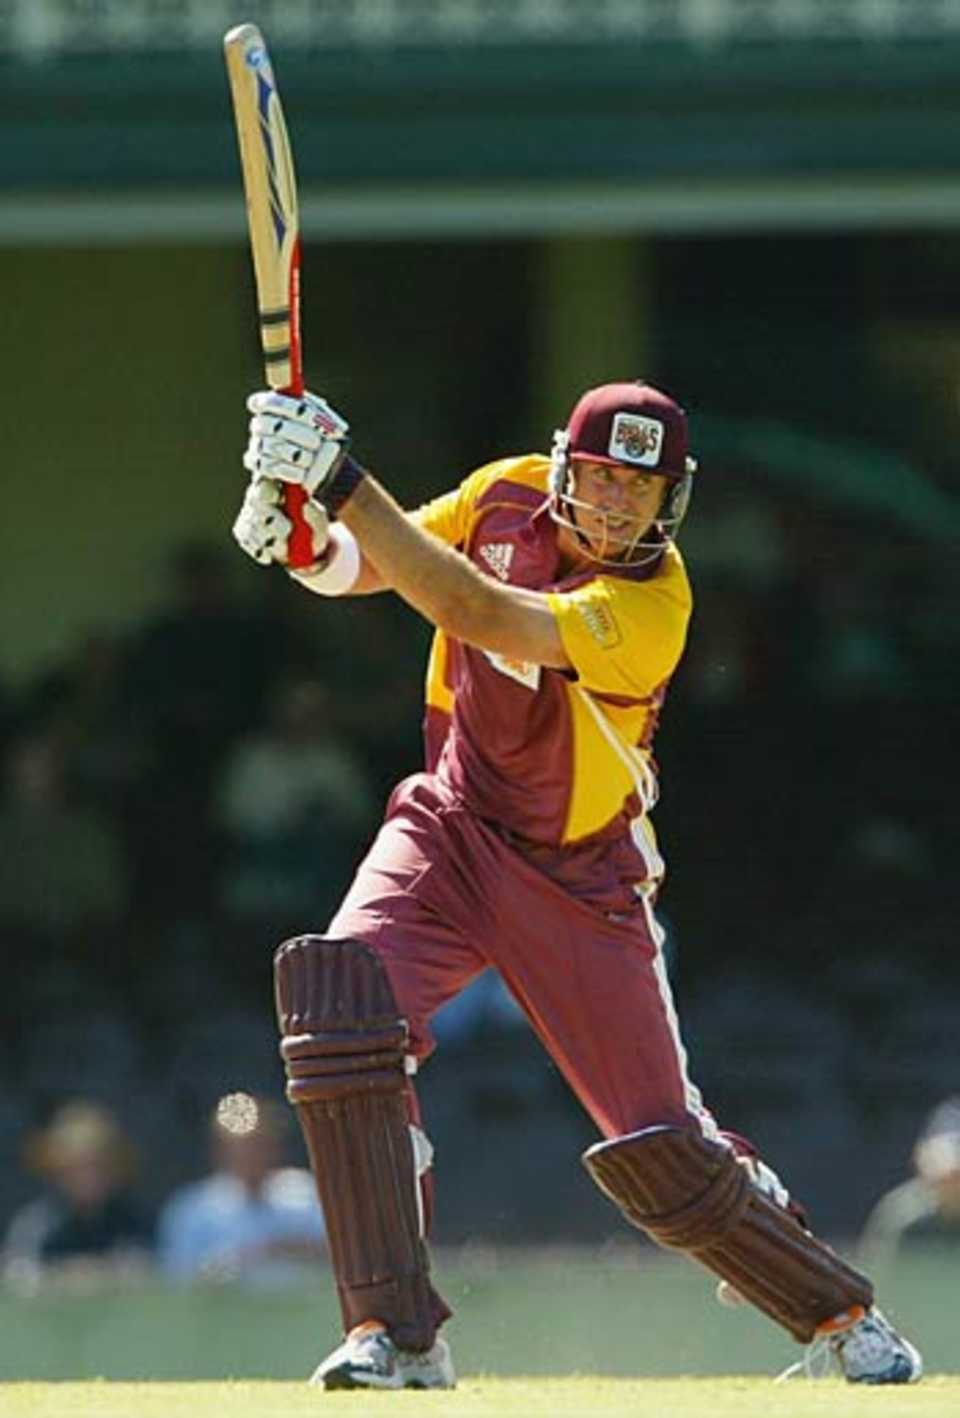 Matthew Hayden square drives on his way to a blistering 83 off 63 balls